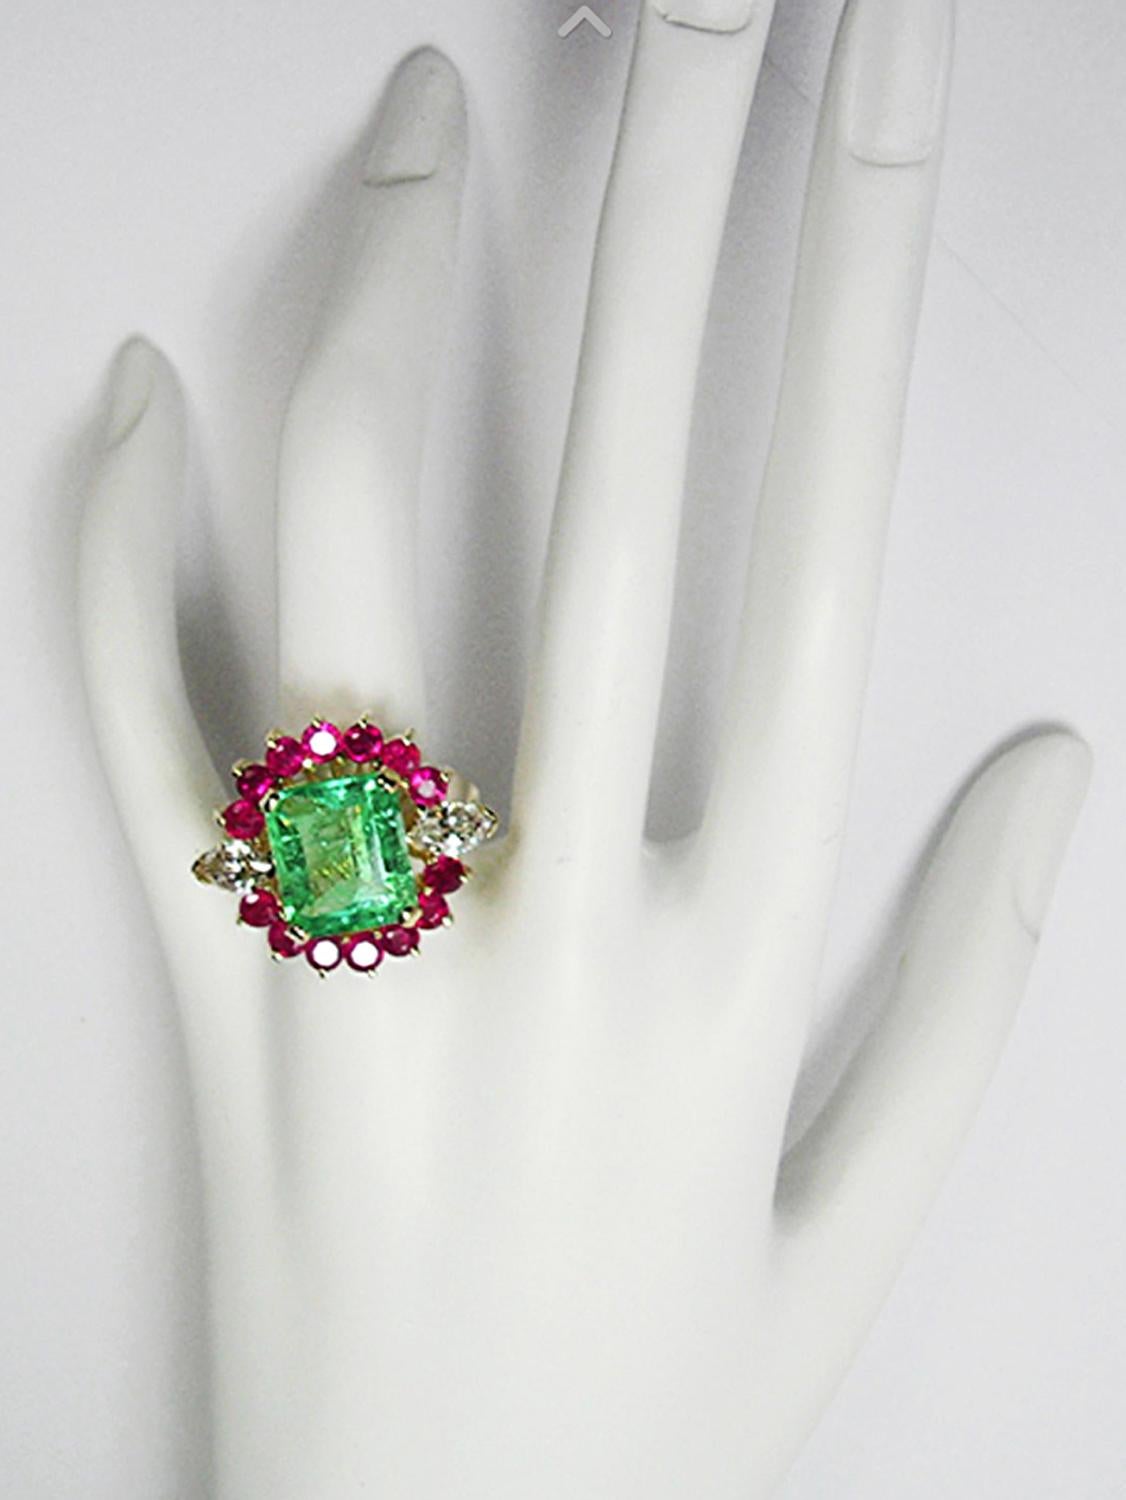 EGL USA Certified 7.14 Carat Colombian Emerald Diamond & Ruby Cocktail Ring  For Sale 1